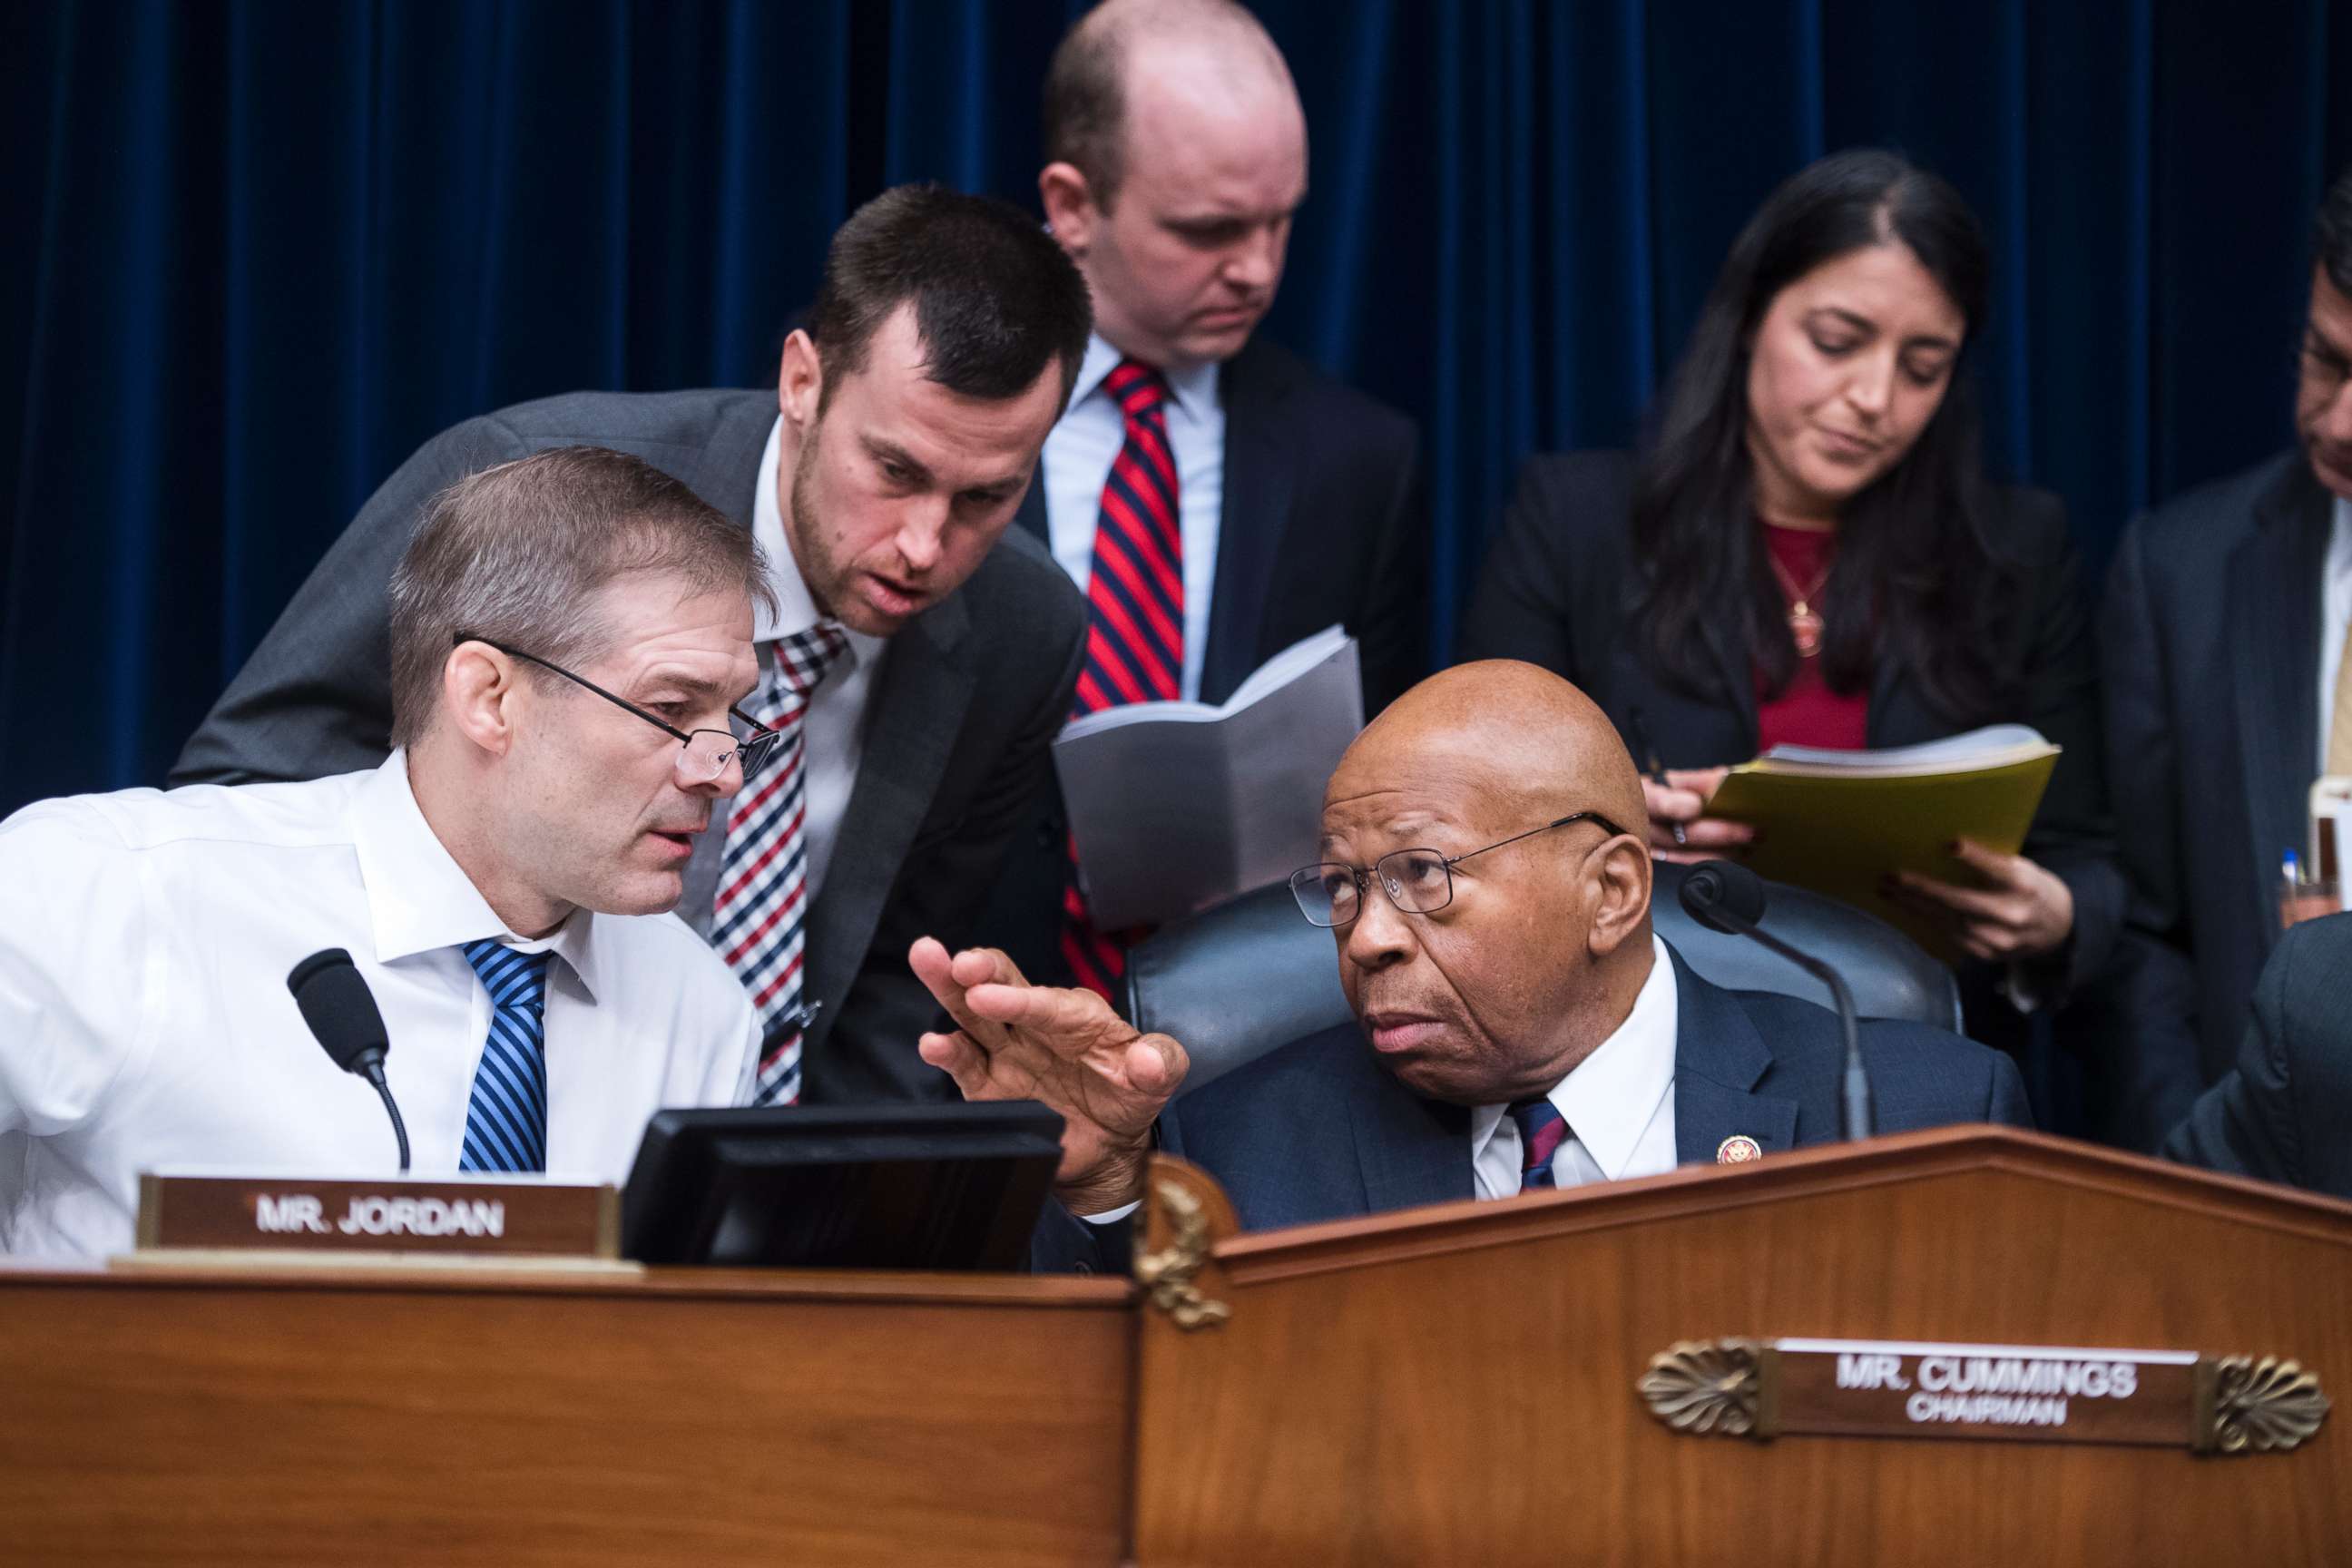 PHOTO: Chairman Elijah Cummings and ranking member Rep. Jim Jordan conduct a House Oversight and Reform Committee business meeting in Rayburn Building, Jan. 29, 2019.